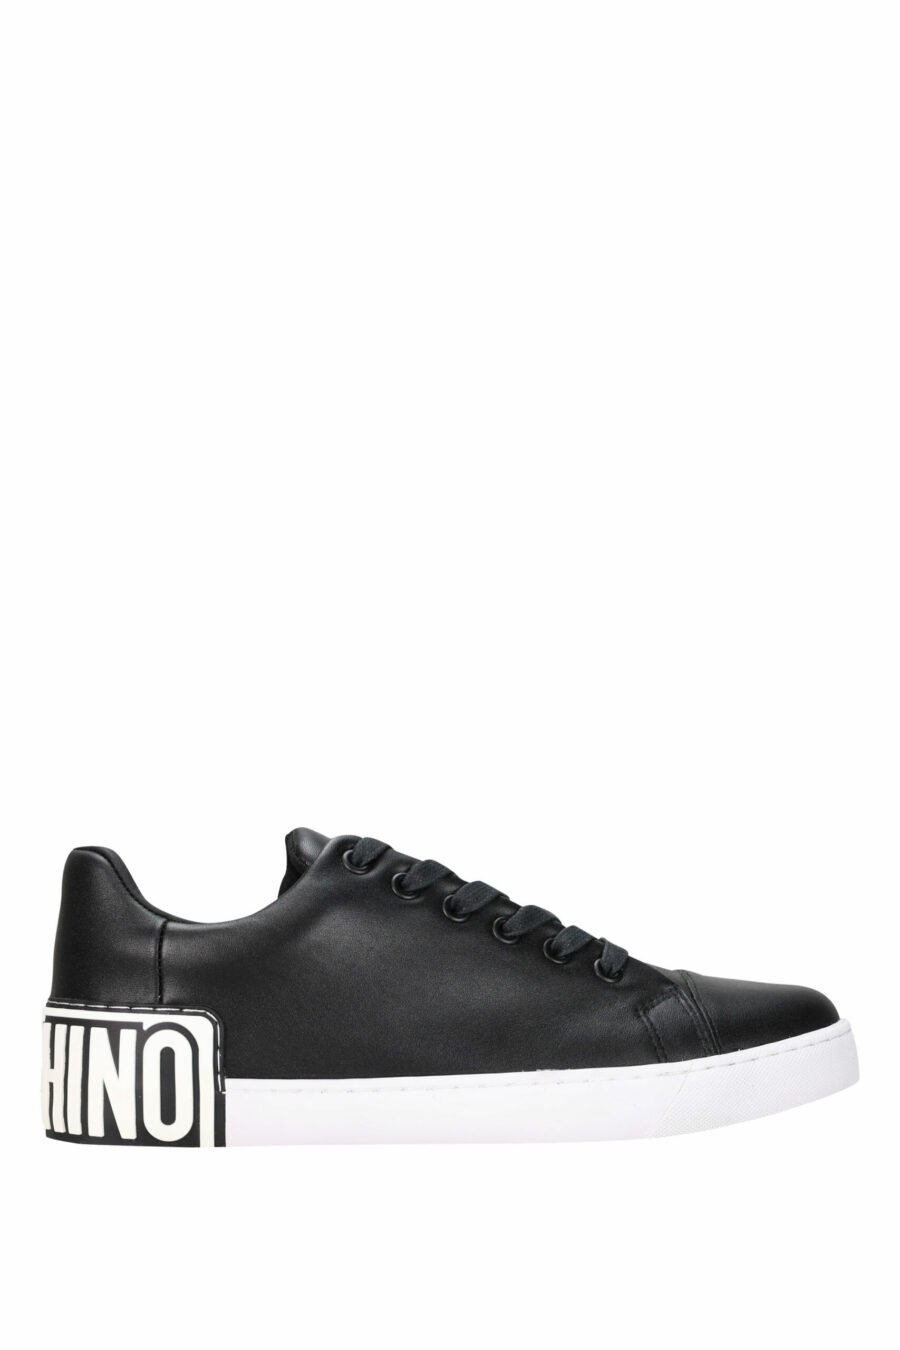 Black trainers "vulc25" with white sole and rubber logo on the back - 8054388585958 scaled